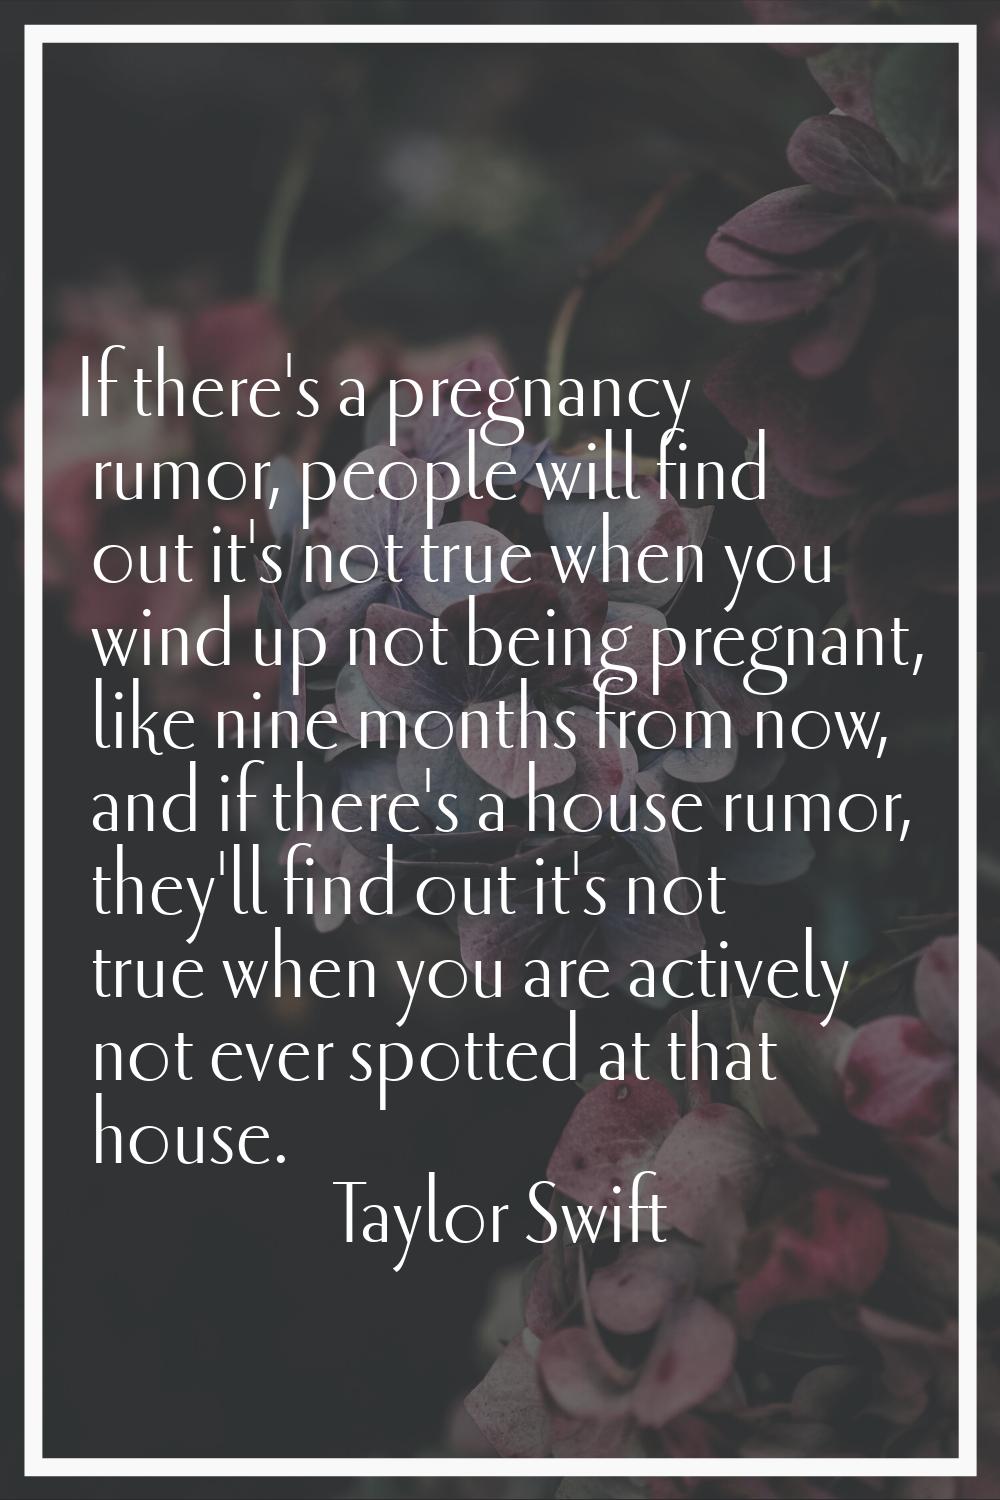 If there's a pregnancy rumor, people will find out it's not true when you wind up not being pregnan